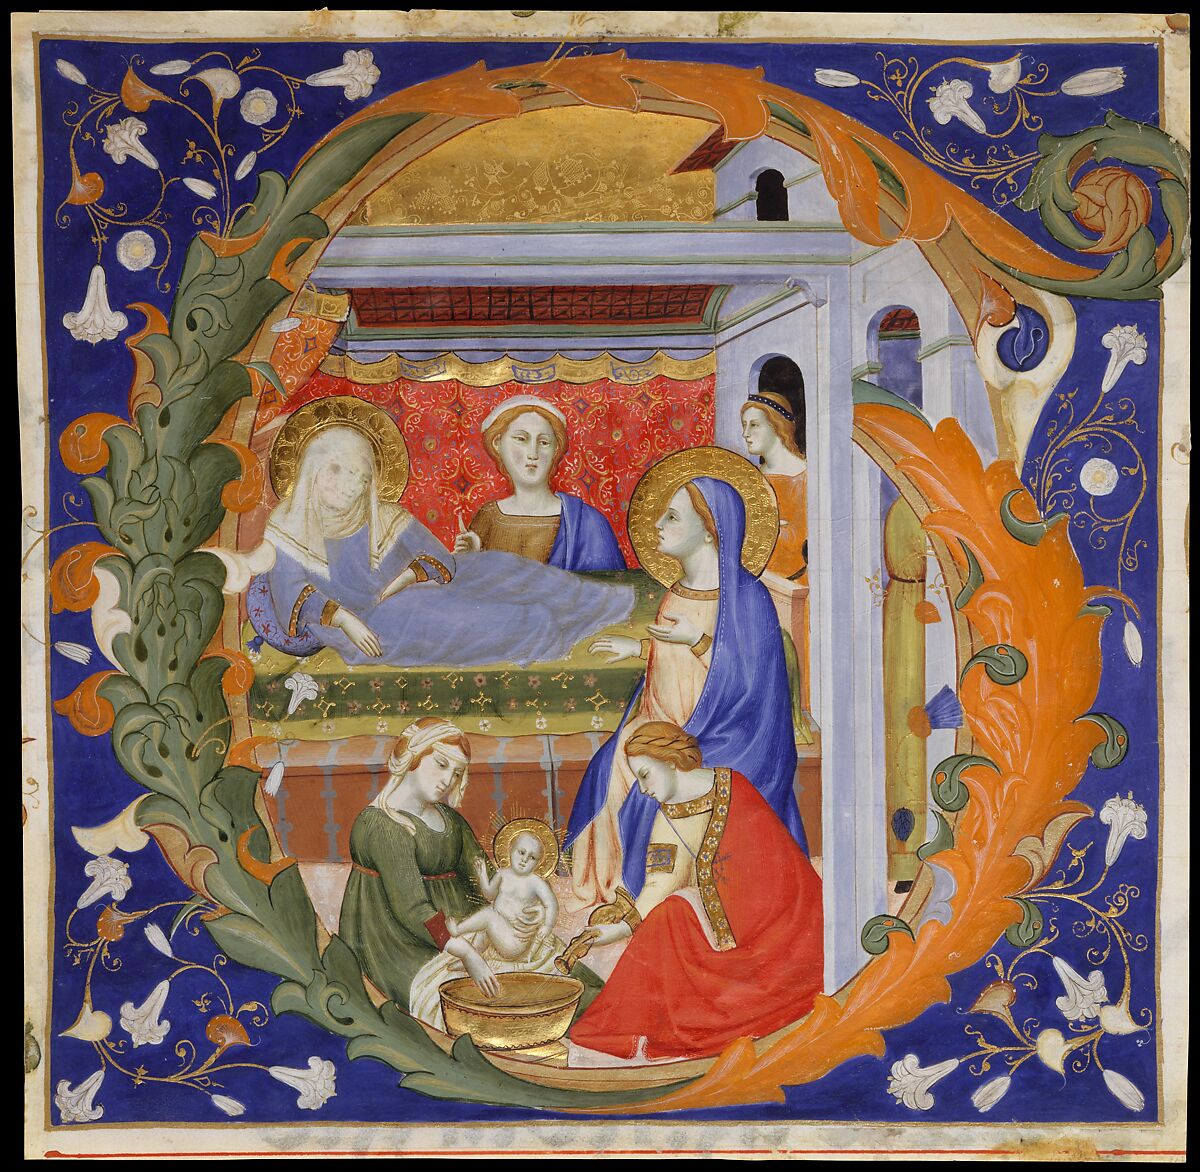 Manuscript Illumination with the Birth of the Virgin in an Initial G, from a Gradual